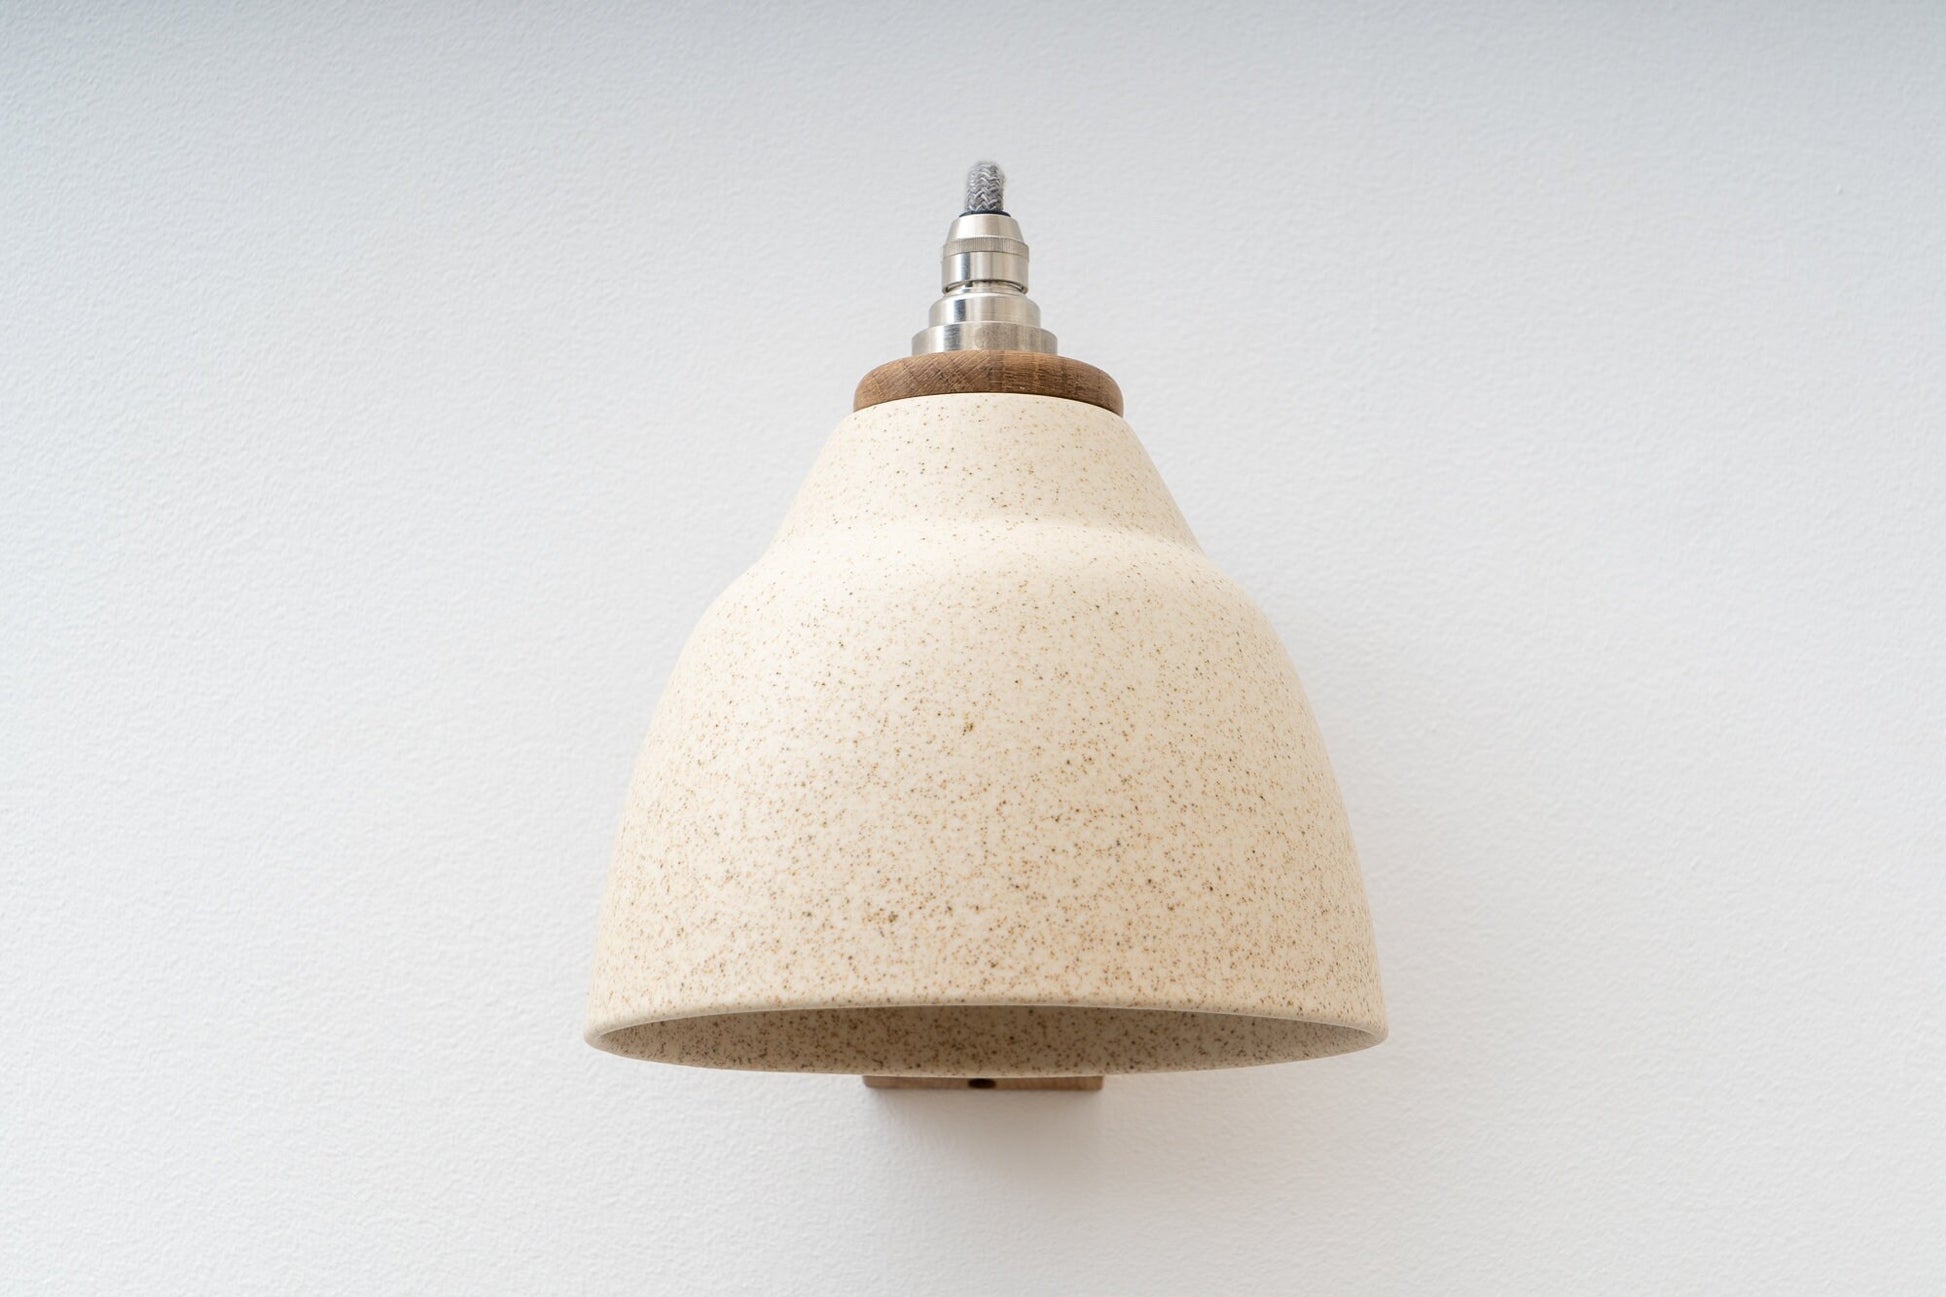 Element Right Angle Wall Light in Speckled Cream by StudioHaran